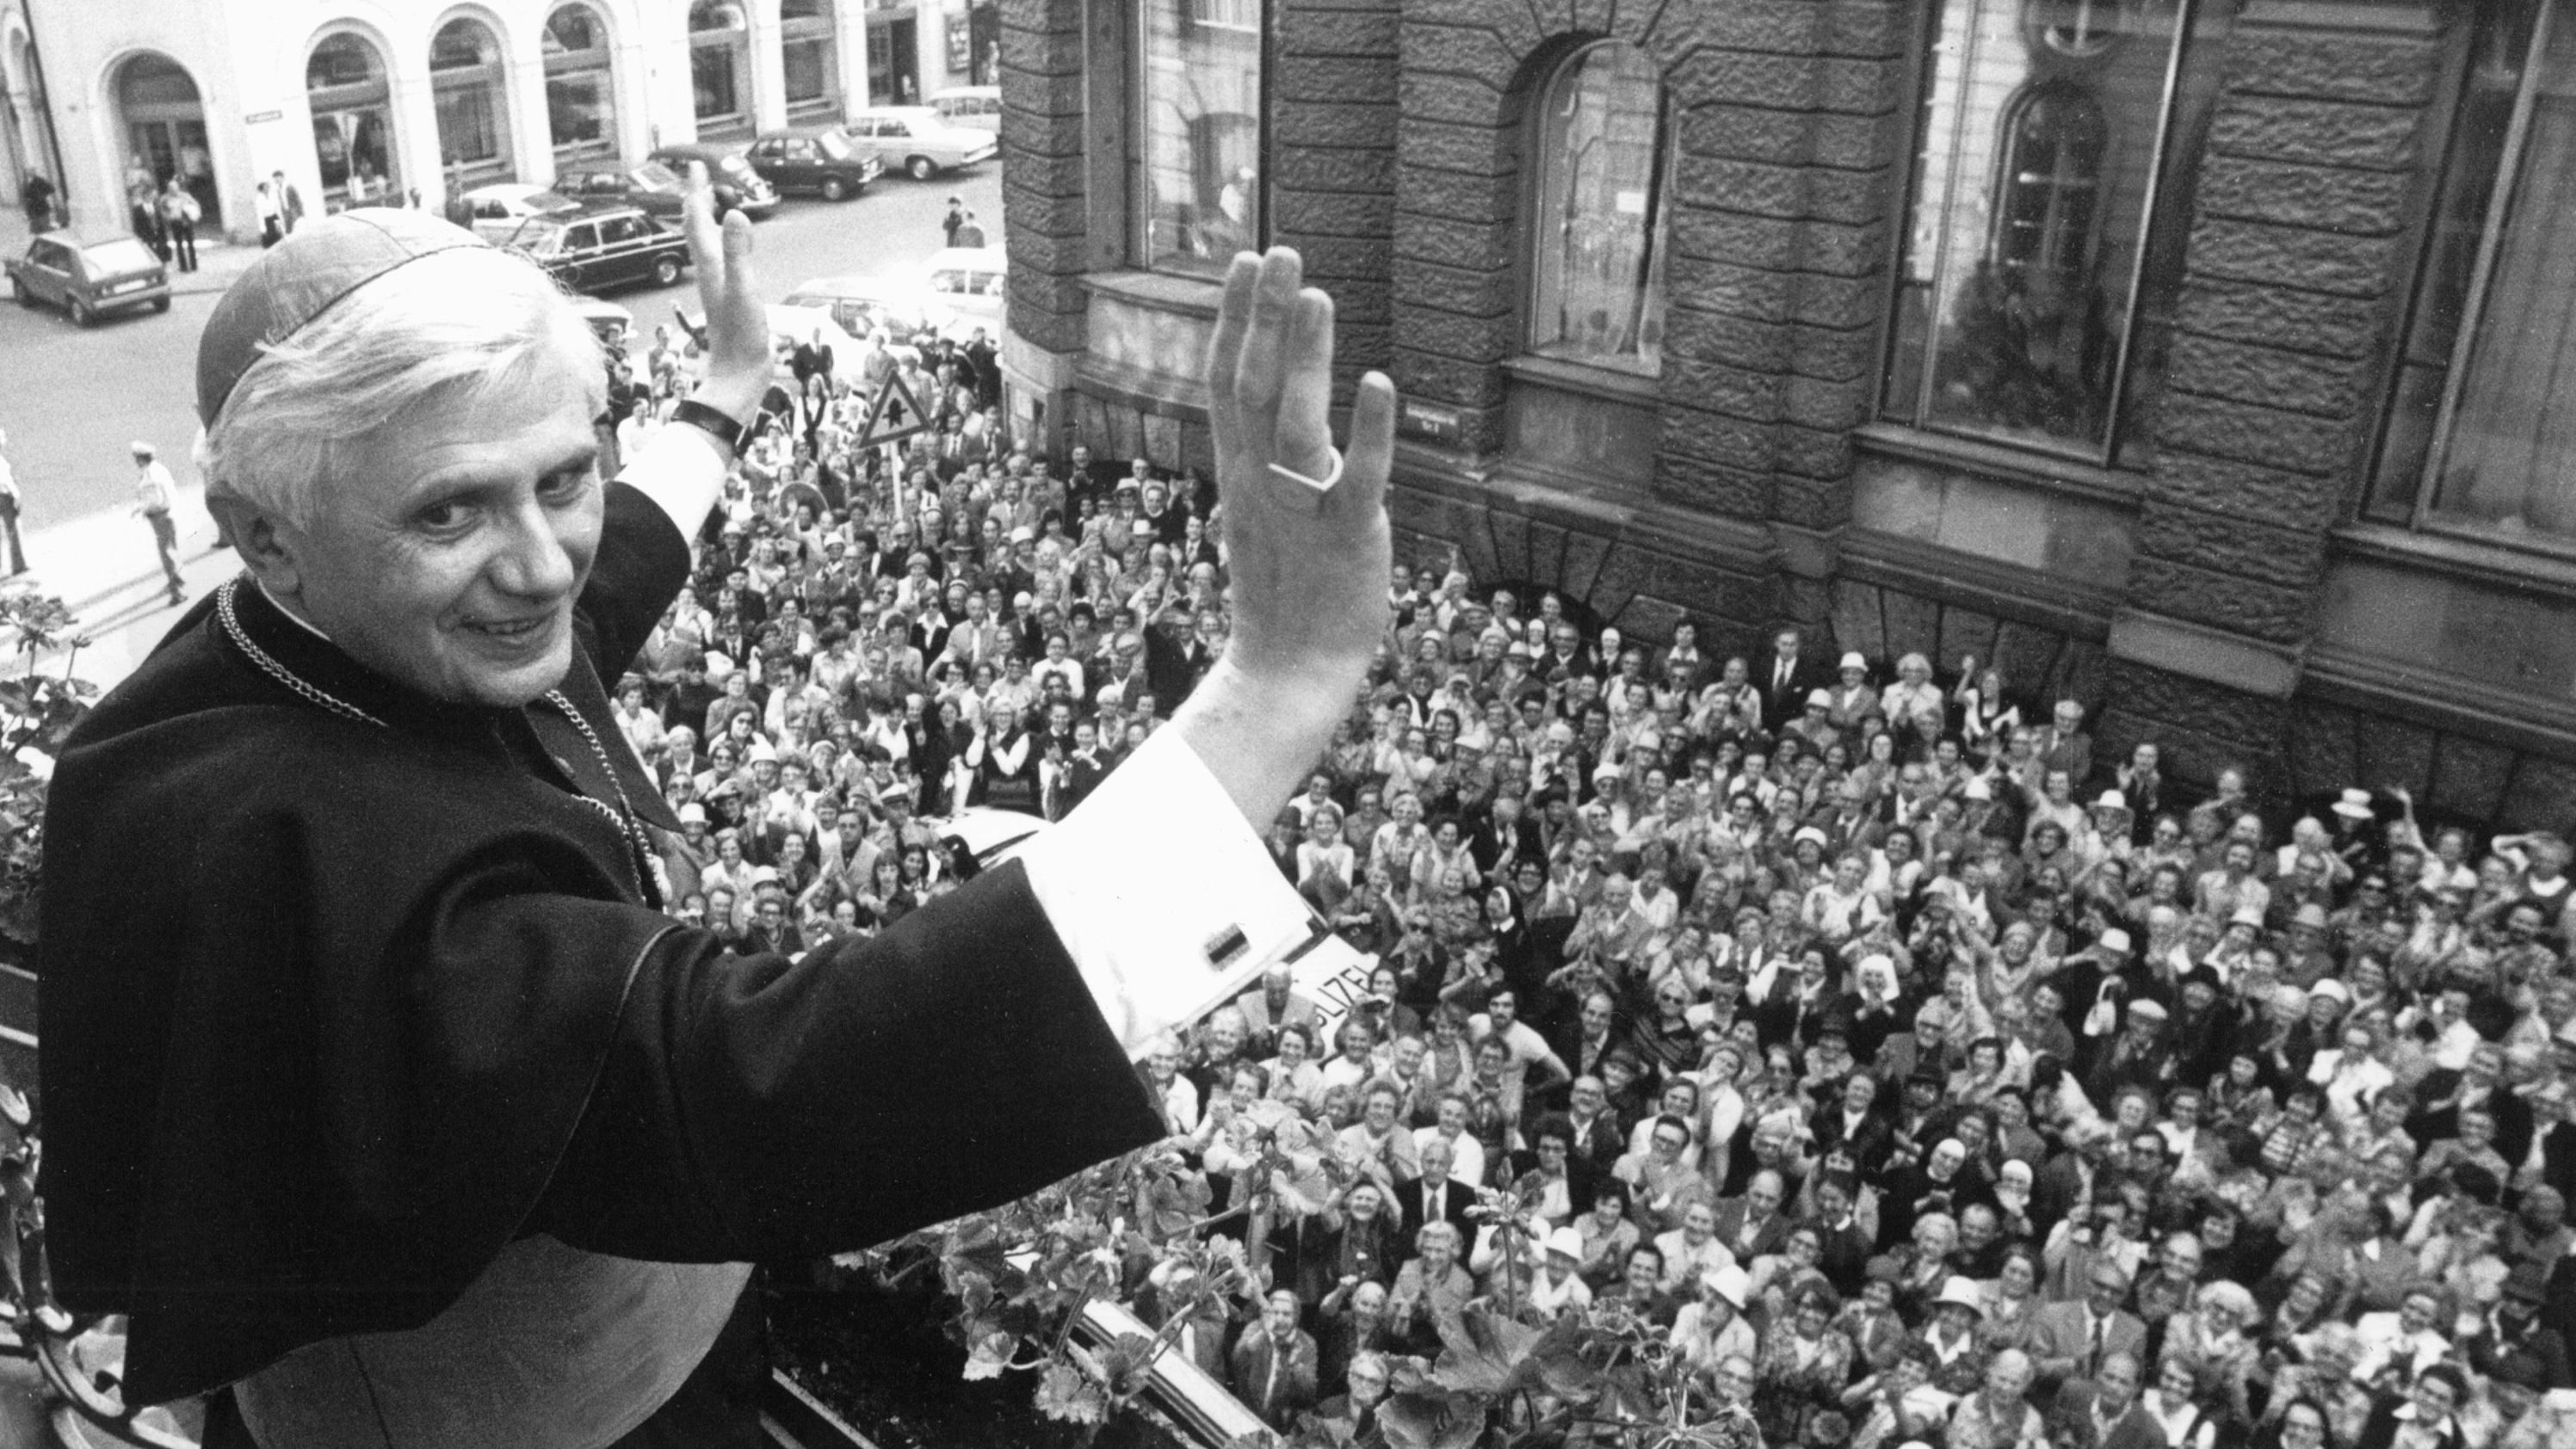 Benedict is greeted by people in Munich, Germany, in July 1977. He was the archbishop of Munich and Freising.